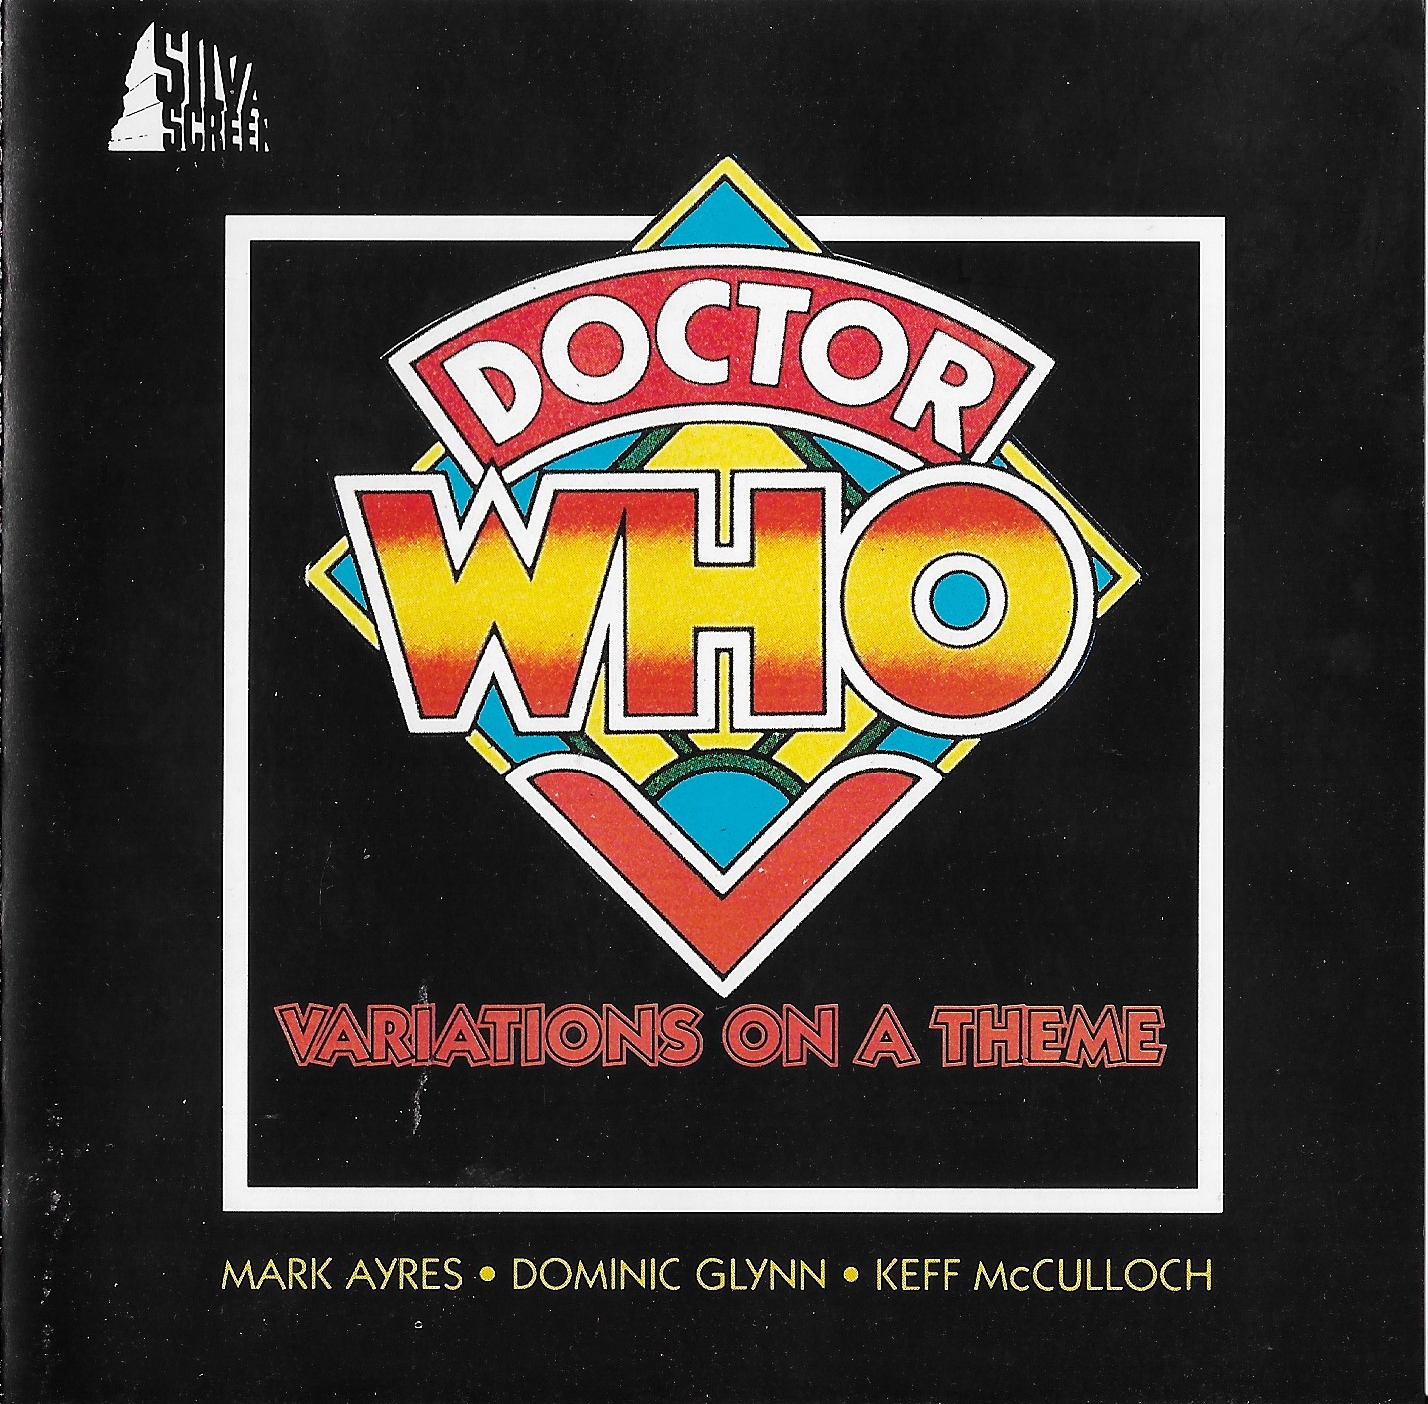 Picture of FILMCD 706 Doctor Who - Variations on a theme - Re-issue by artist Ron Grainer from the BBC cdsingles - Records and Tapes library